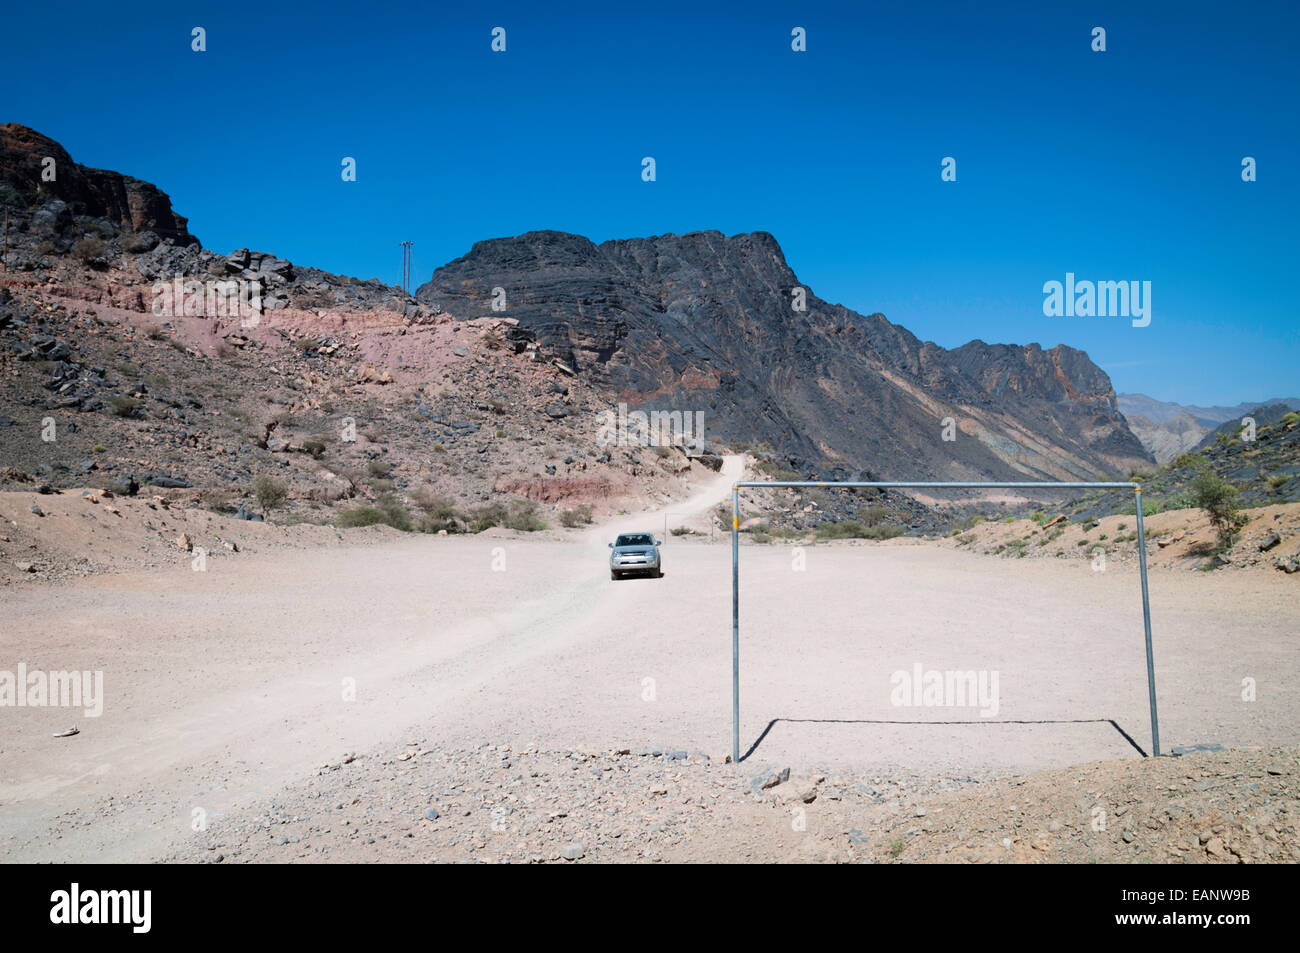 Local Omani village soccer field built across a road - the only flat location. Stock Photo